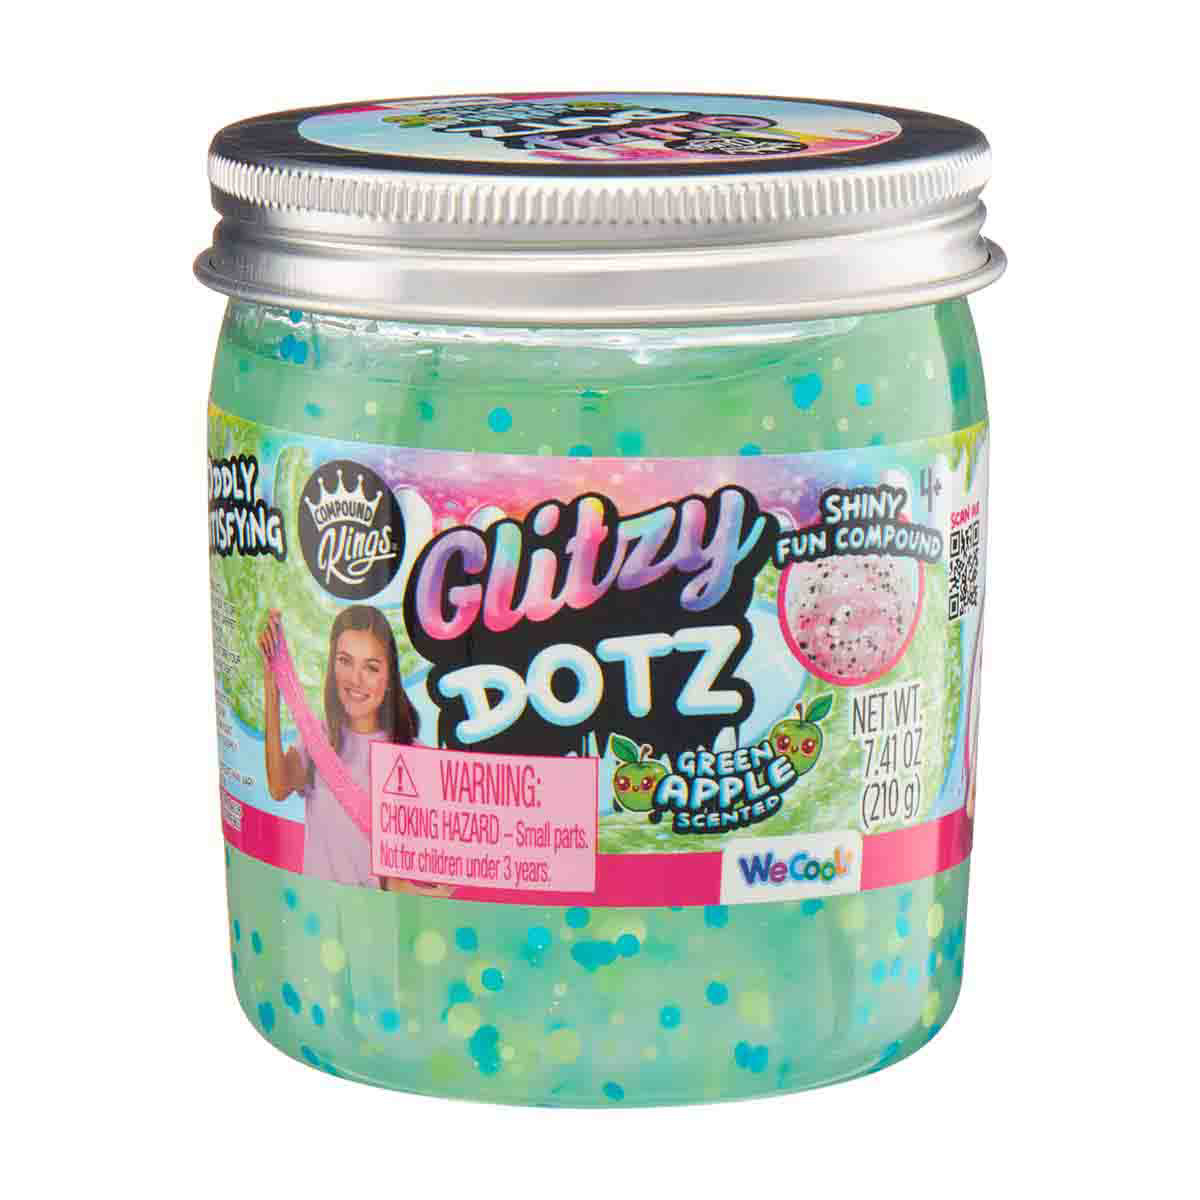 Compound Kings Green Apple Scented Glitzy Dotz, 7.41 oz